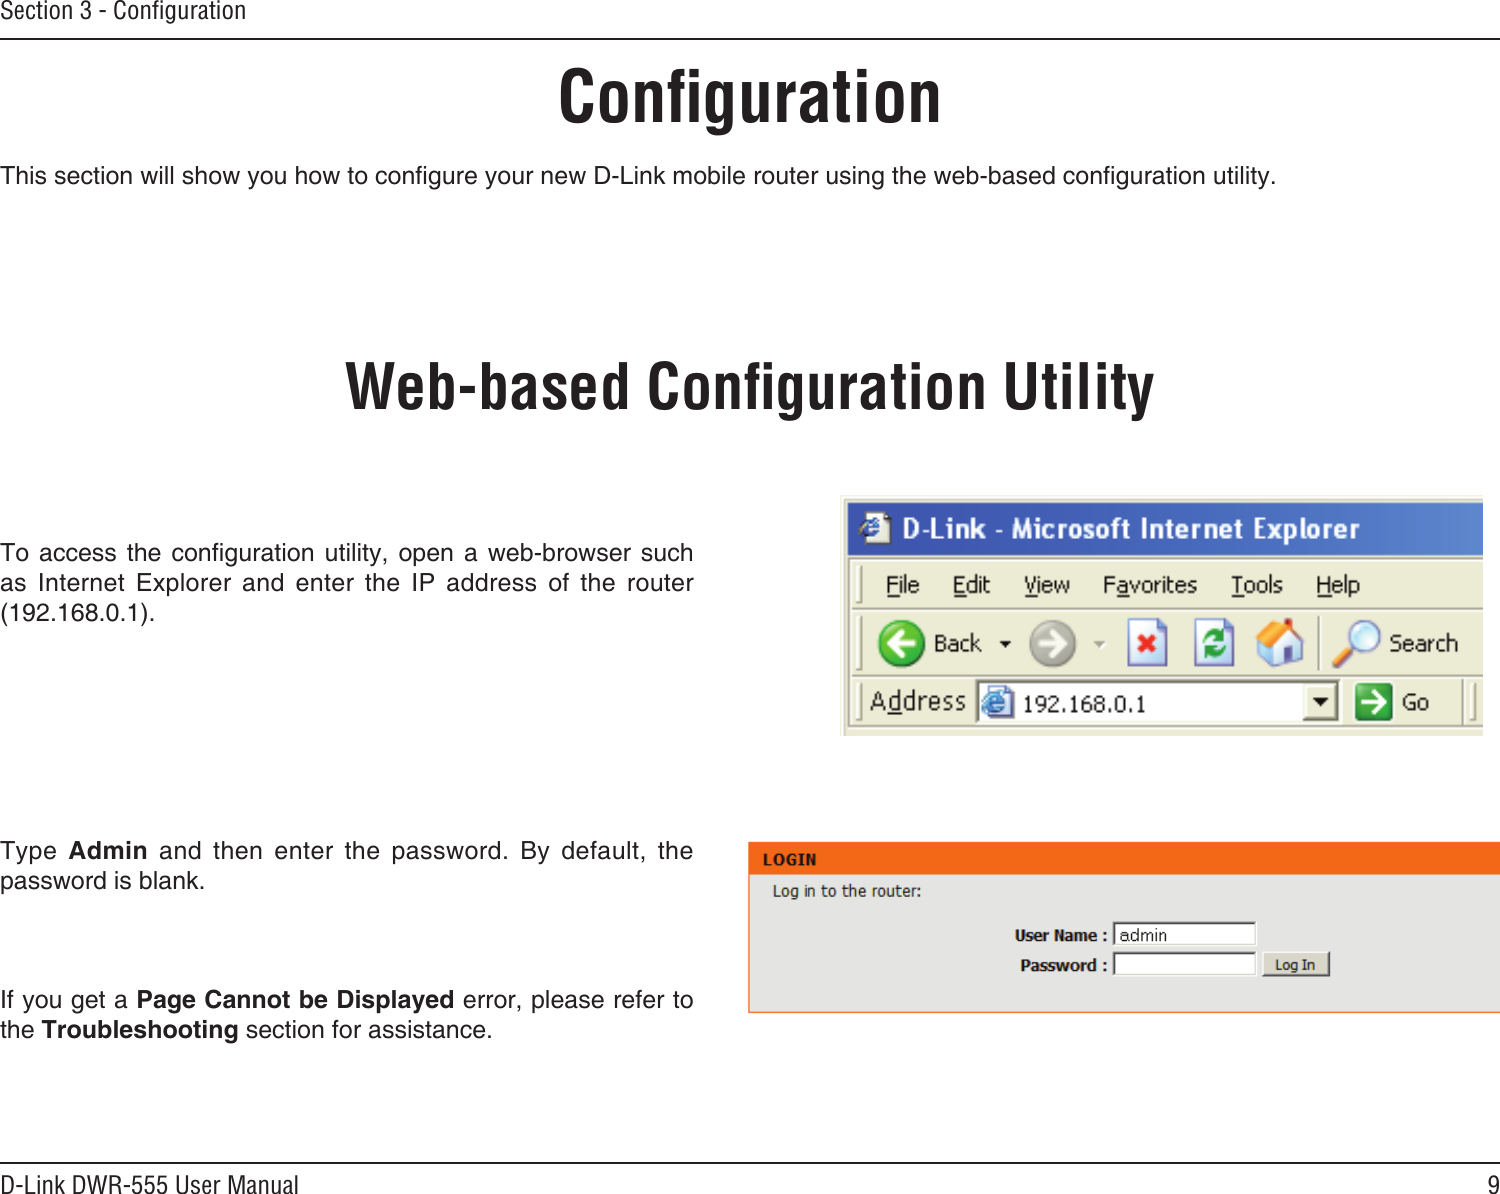 9D-Link DWR-555 User ManualSection 3 - ConﬁgurationConﬁgurationThis section will show you how to congure your new D-Link mobile router using the web-based conguration utility.Web-based Conﬁguration UtilityTo access  the  conguration  utility,  open  a  web-browser such as  Internet  Explorer  and  enter  the  IP  address  of  the  router (192.168.0.1).Type  Admin  and  then  enter  the  password.  By  default,  the password is blank.If you get a Page Cannot be Displayed error, please refer to the Troubleshooting section for assistance.